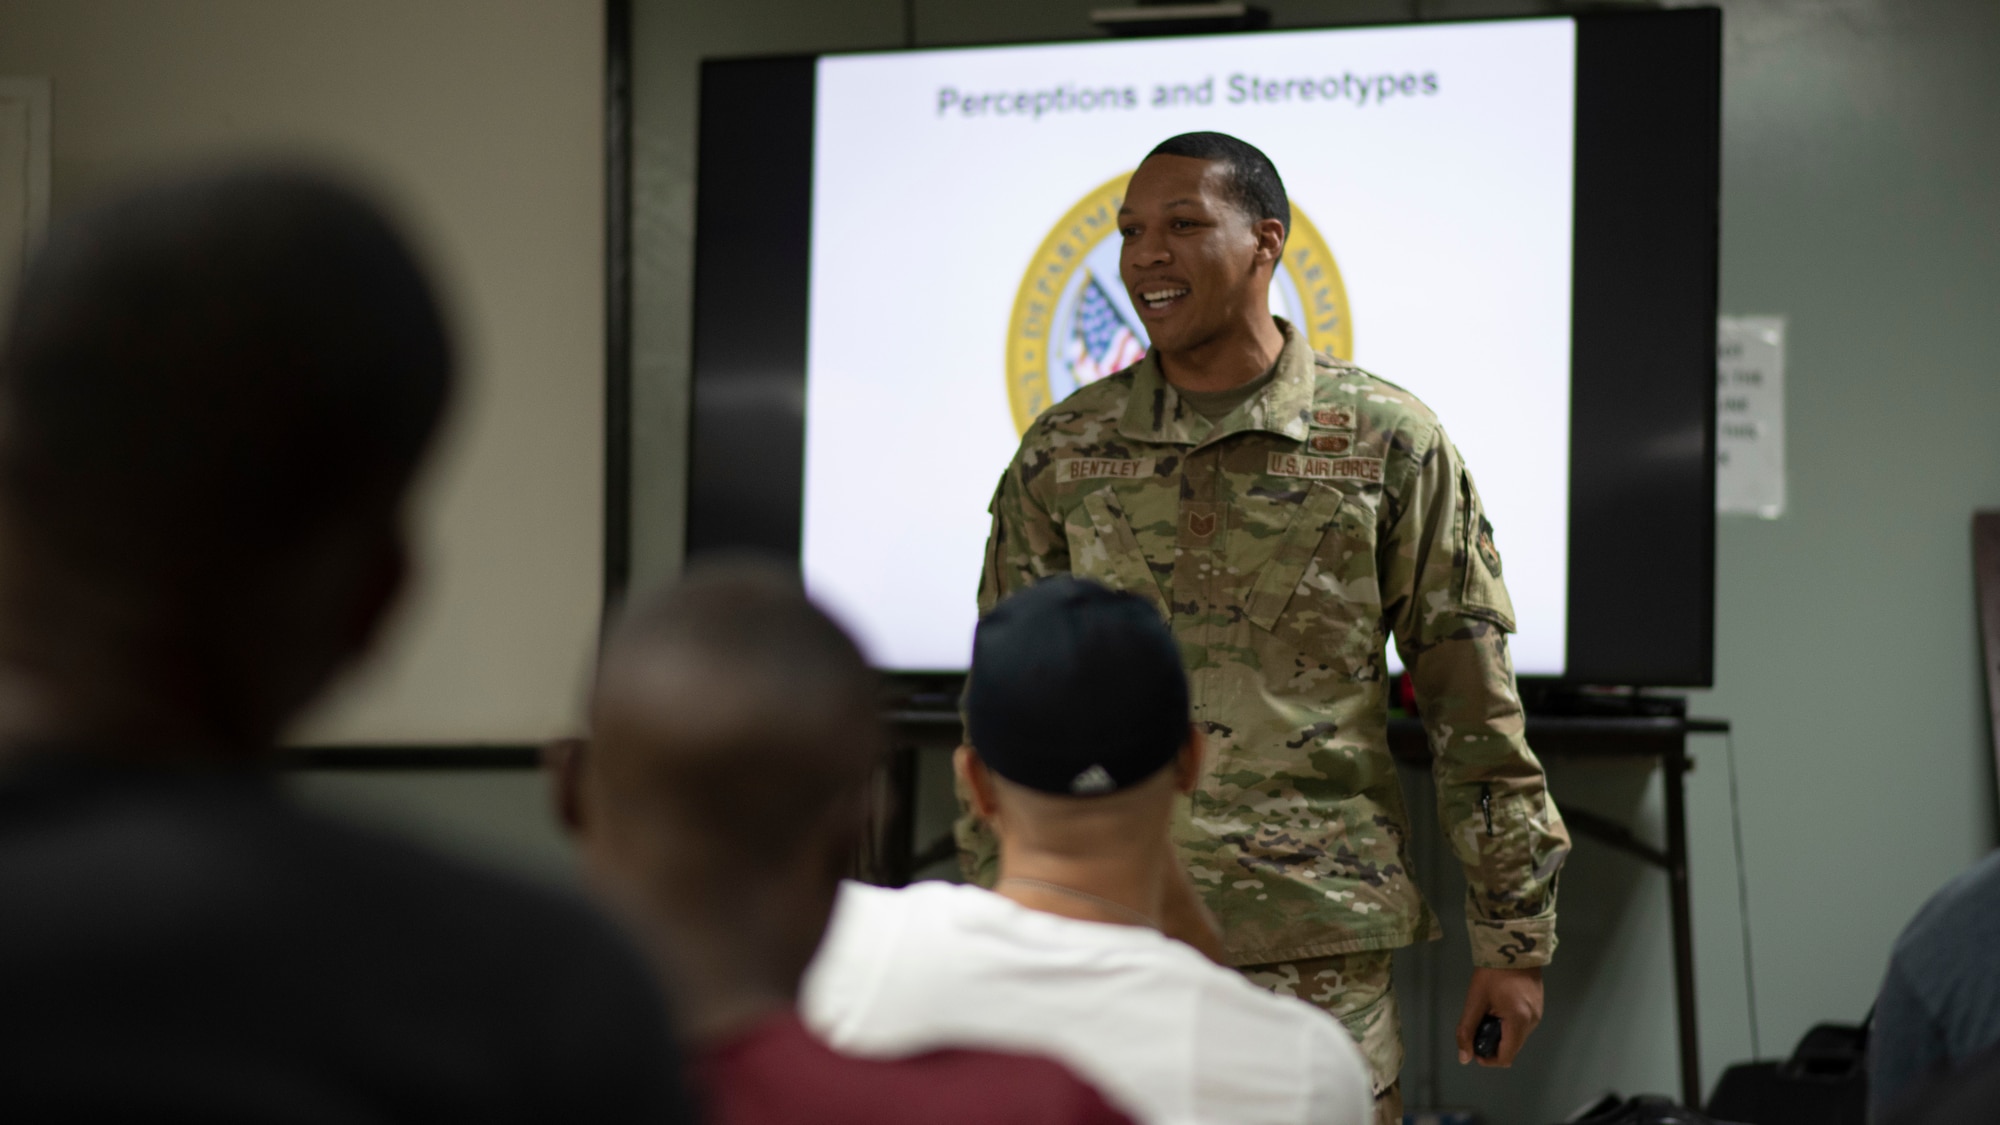 U.S. Air Force Tech. Sgt. Malcolm Bentley, 386th Air Expeditionary Wing equal opportunity director, teaches a class on perception and stereotypes during a U.S. Army EO leaders course at Camp Buehring, Kuwait, November 9, 2021. Bentley was the first Air Force EO invited to help instruct this course.  (U.S. Air Force photo by Staff Sgt. Ryan Brooks)